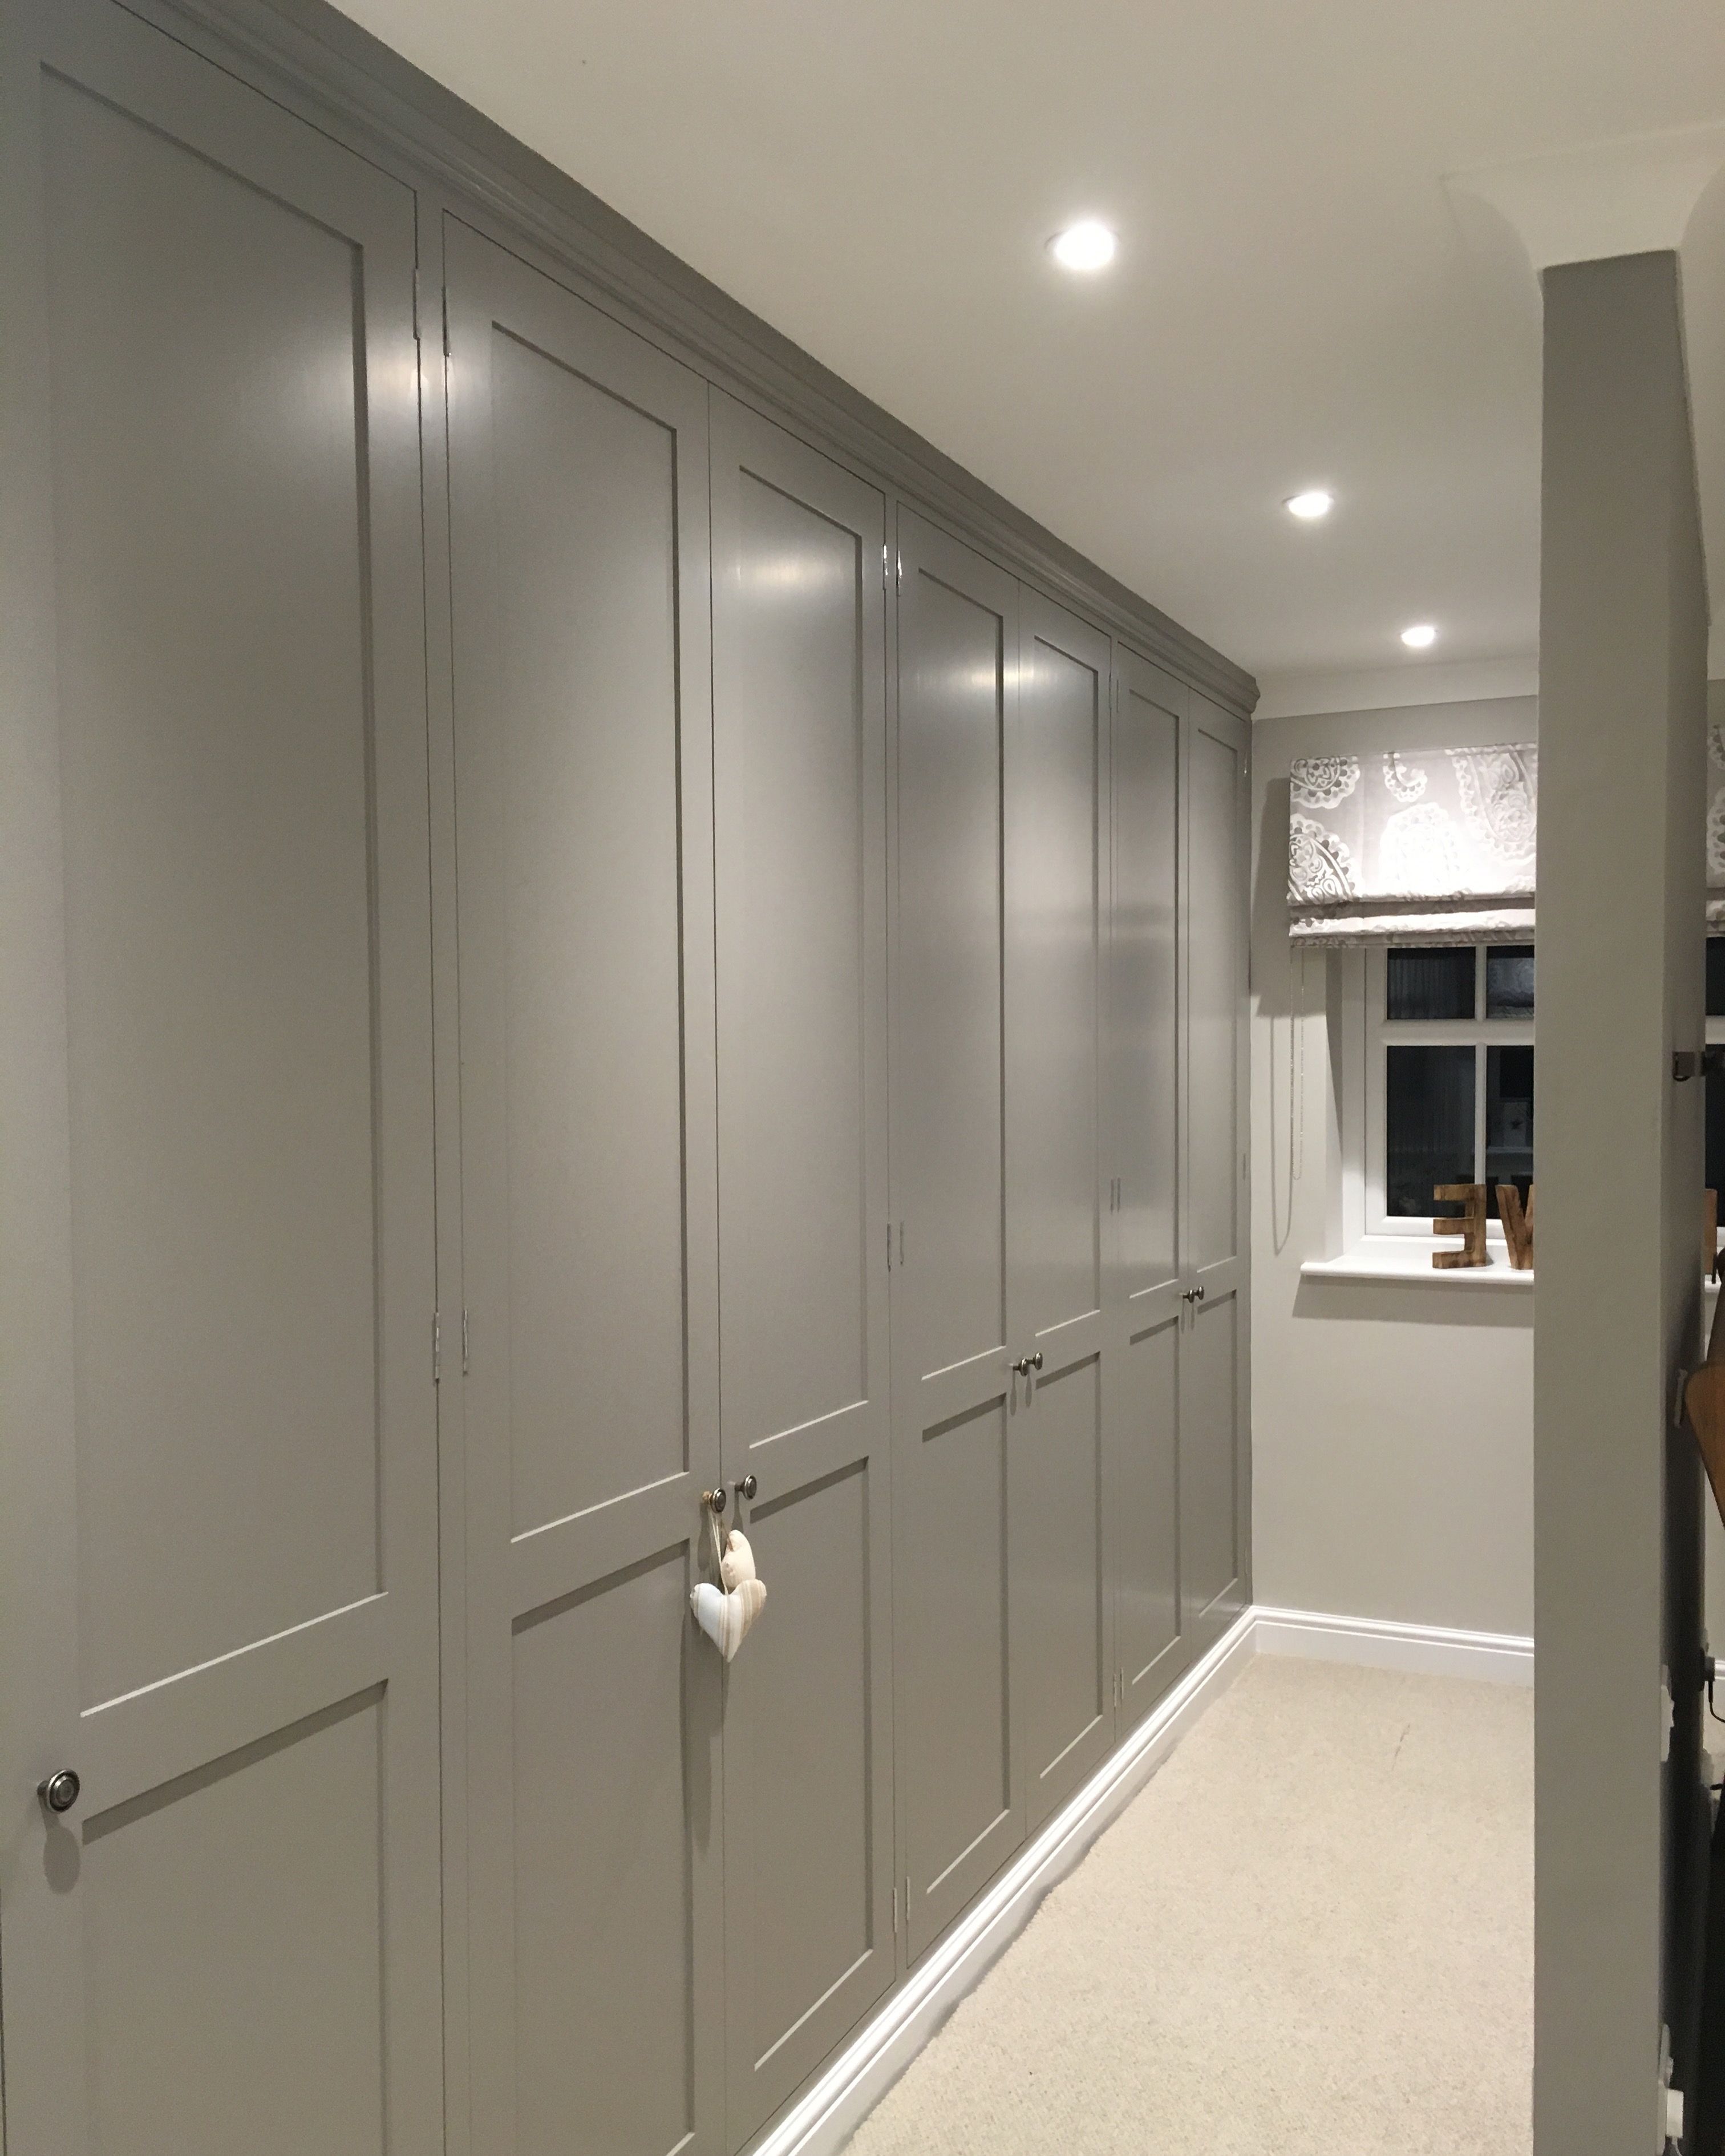 Our Homenew Built In Wardrobes Painted Farrow And Ball Worsted | Built  In Wardrobe Doors, Built In Cupboards Bedroom, Bedroom Decor Inspiration Intended For Farrow And Ball Painted Wardrobes (Gallery 4 of 20)